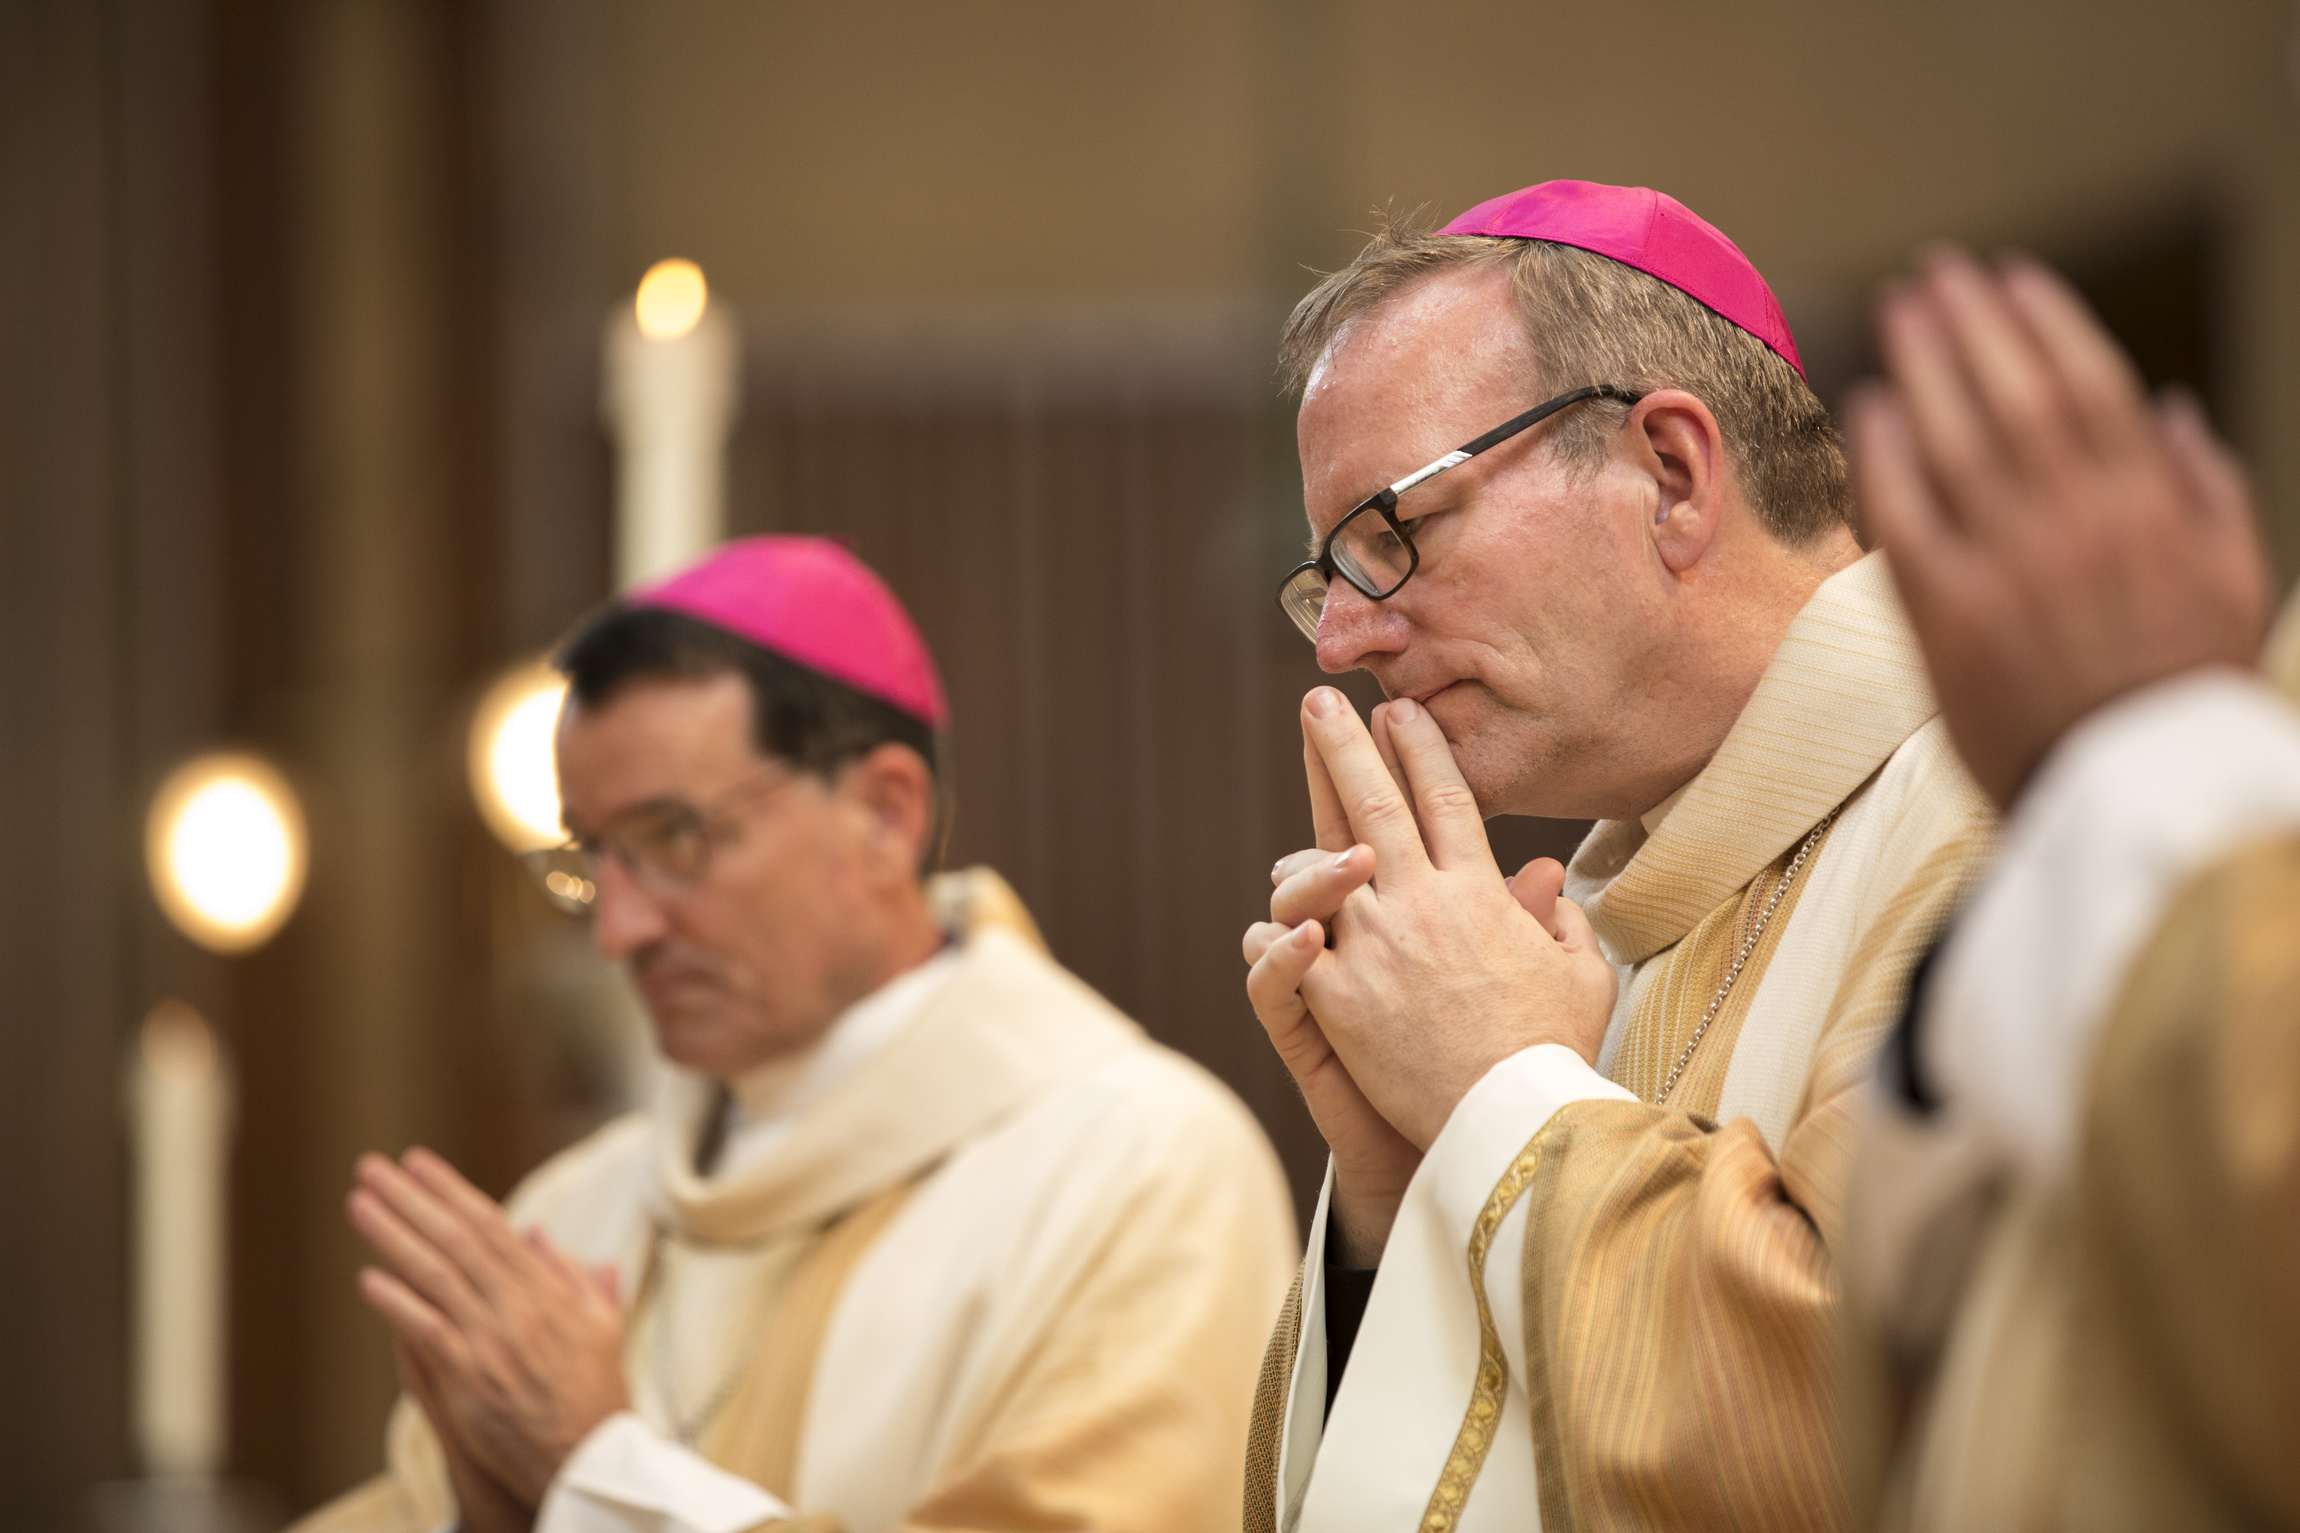 Auxiliary Bishops Joseph Brennan and Robert Barron pray during their Sept. 8, 2015, episcopal ordination at the Cathedral of Our Lady of the Angels in Los Angeles. Not pictured is Auxiliary Bishop David O'Connell, who was also ordained. (CNS)